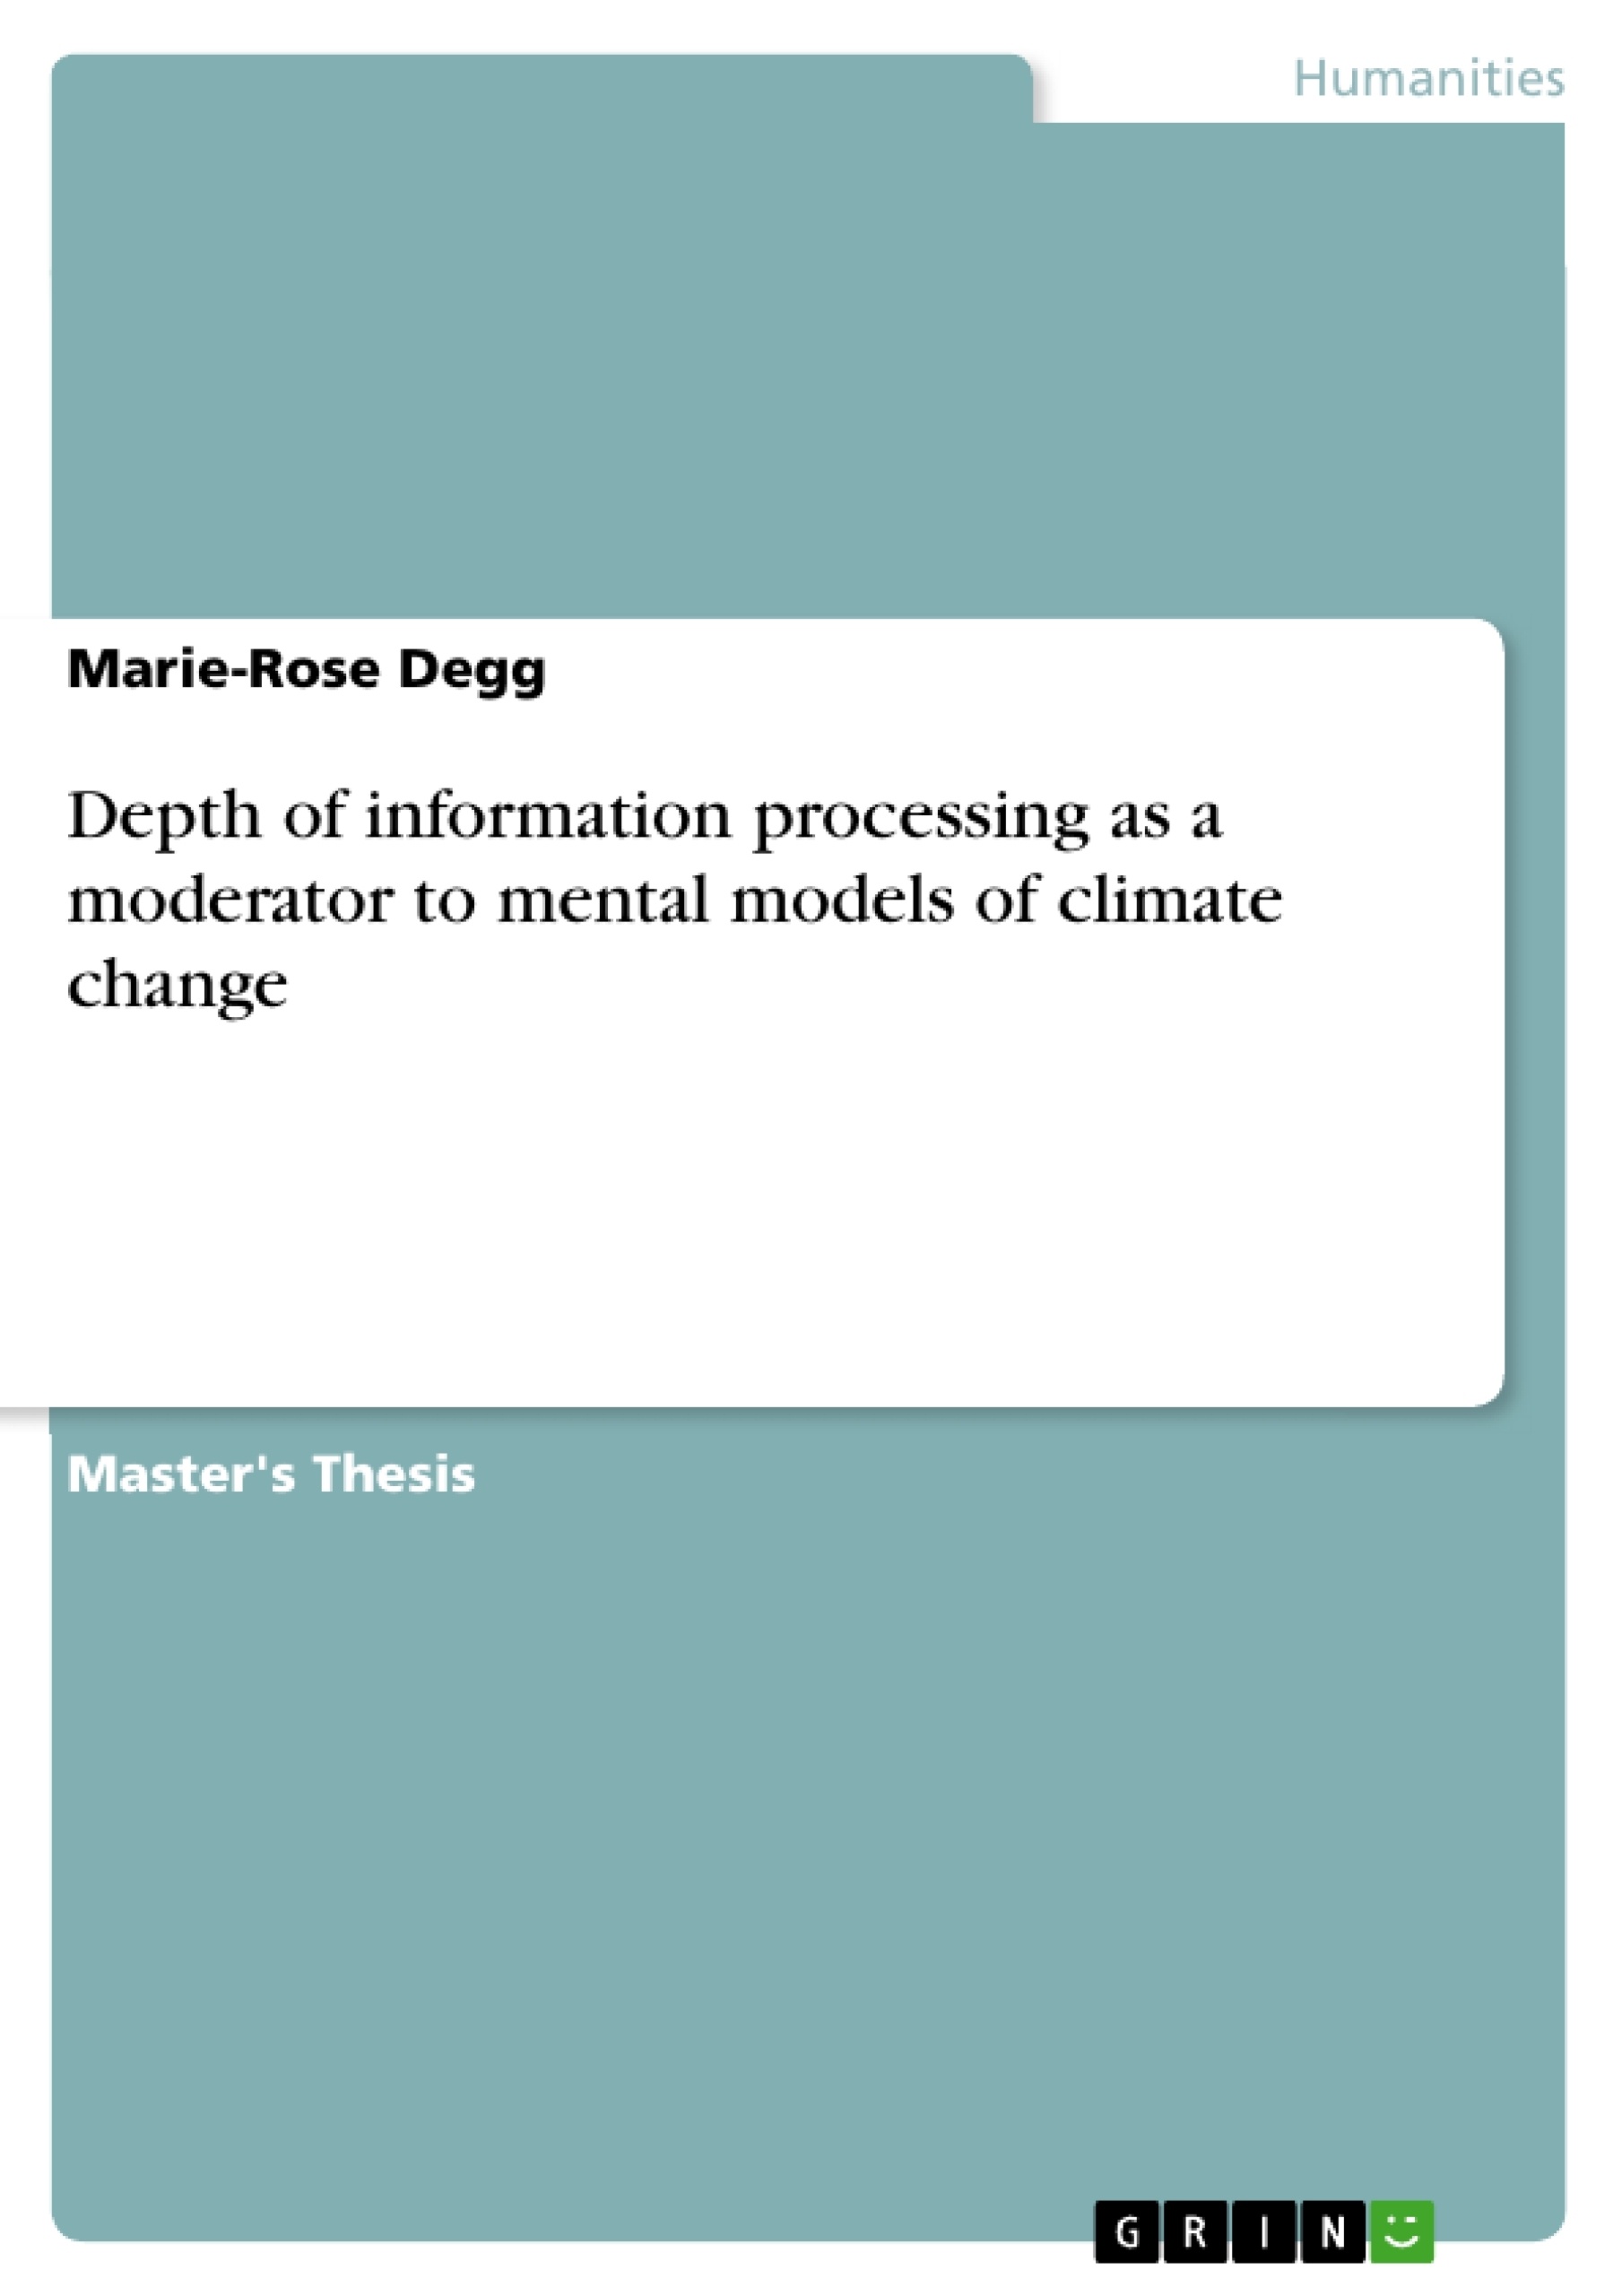 Title: Depth of information processing as a moderator to mental models of climate change